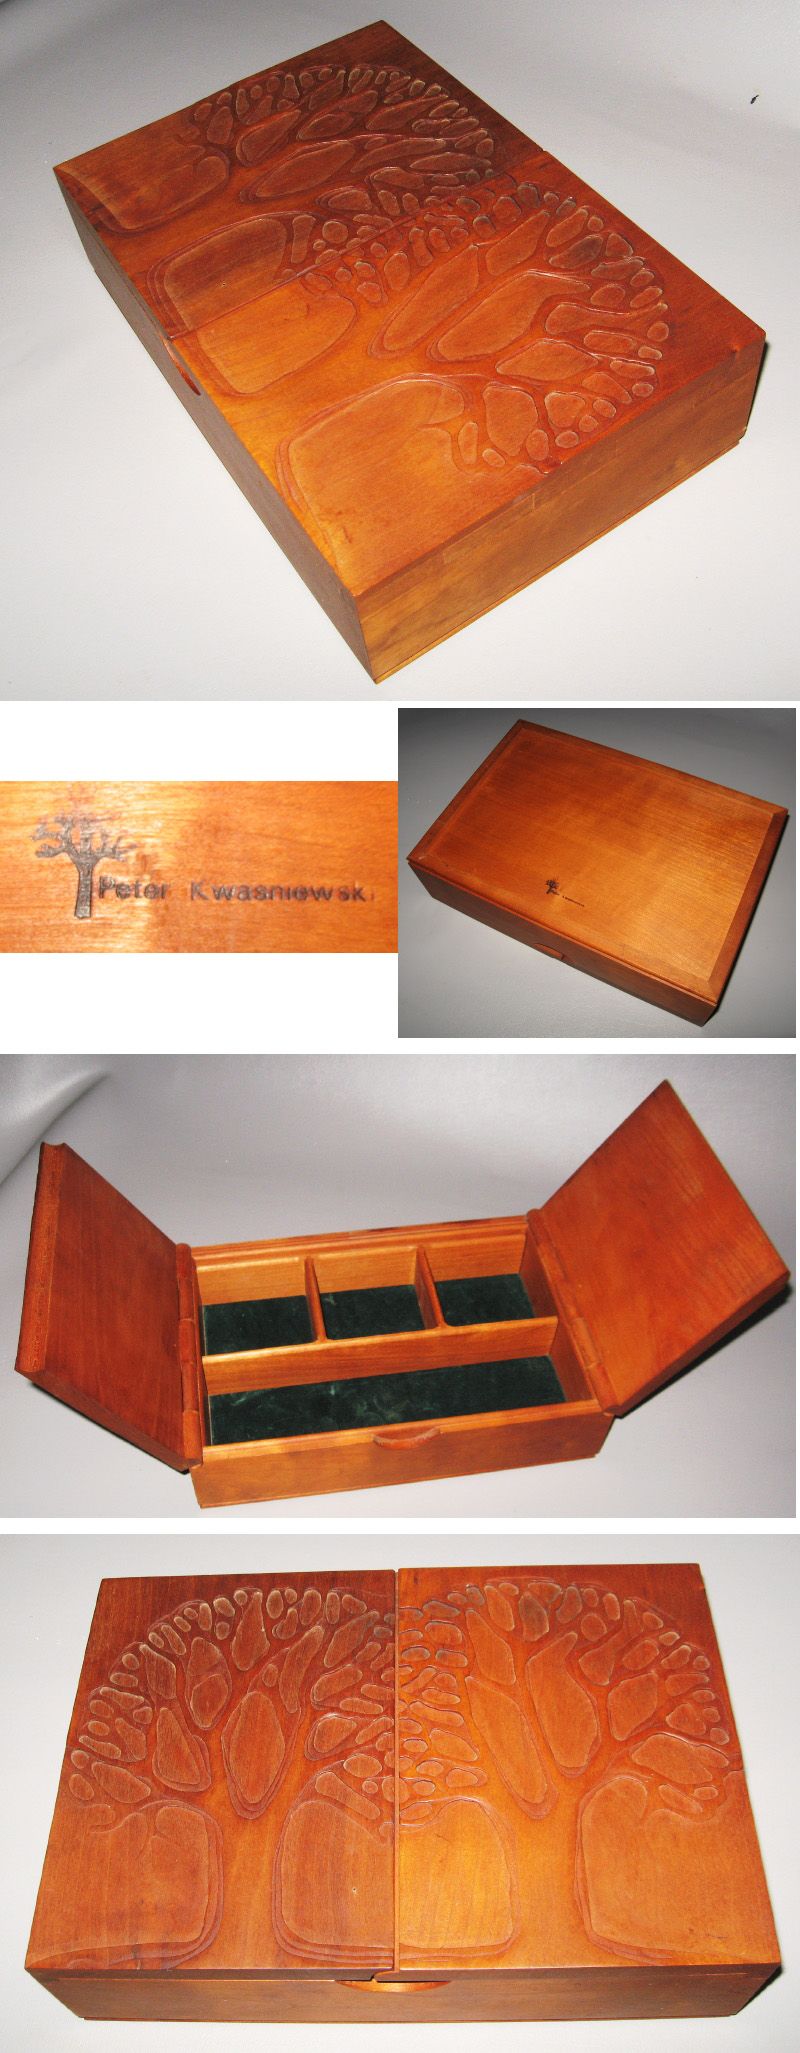 Wood Jewelry Box Crafted by Peter Kwasniewski Hand Carved C1960